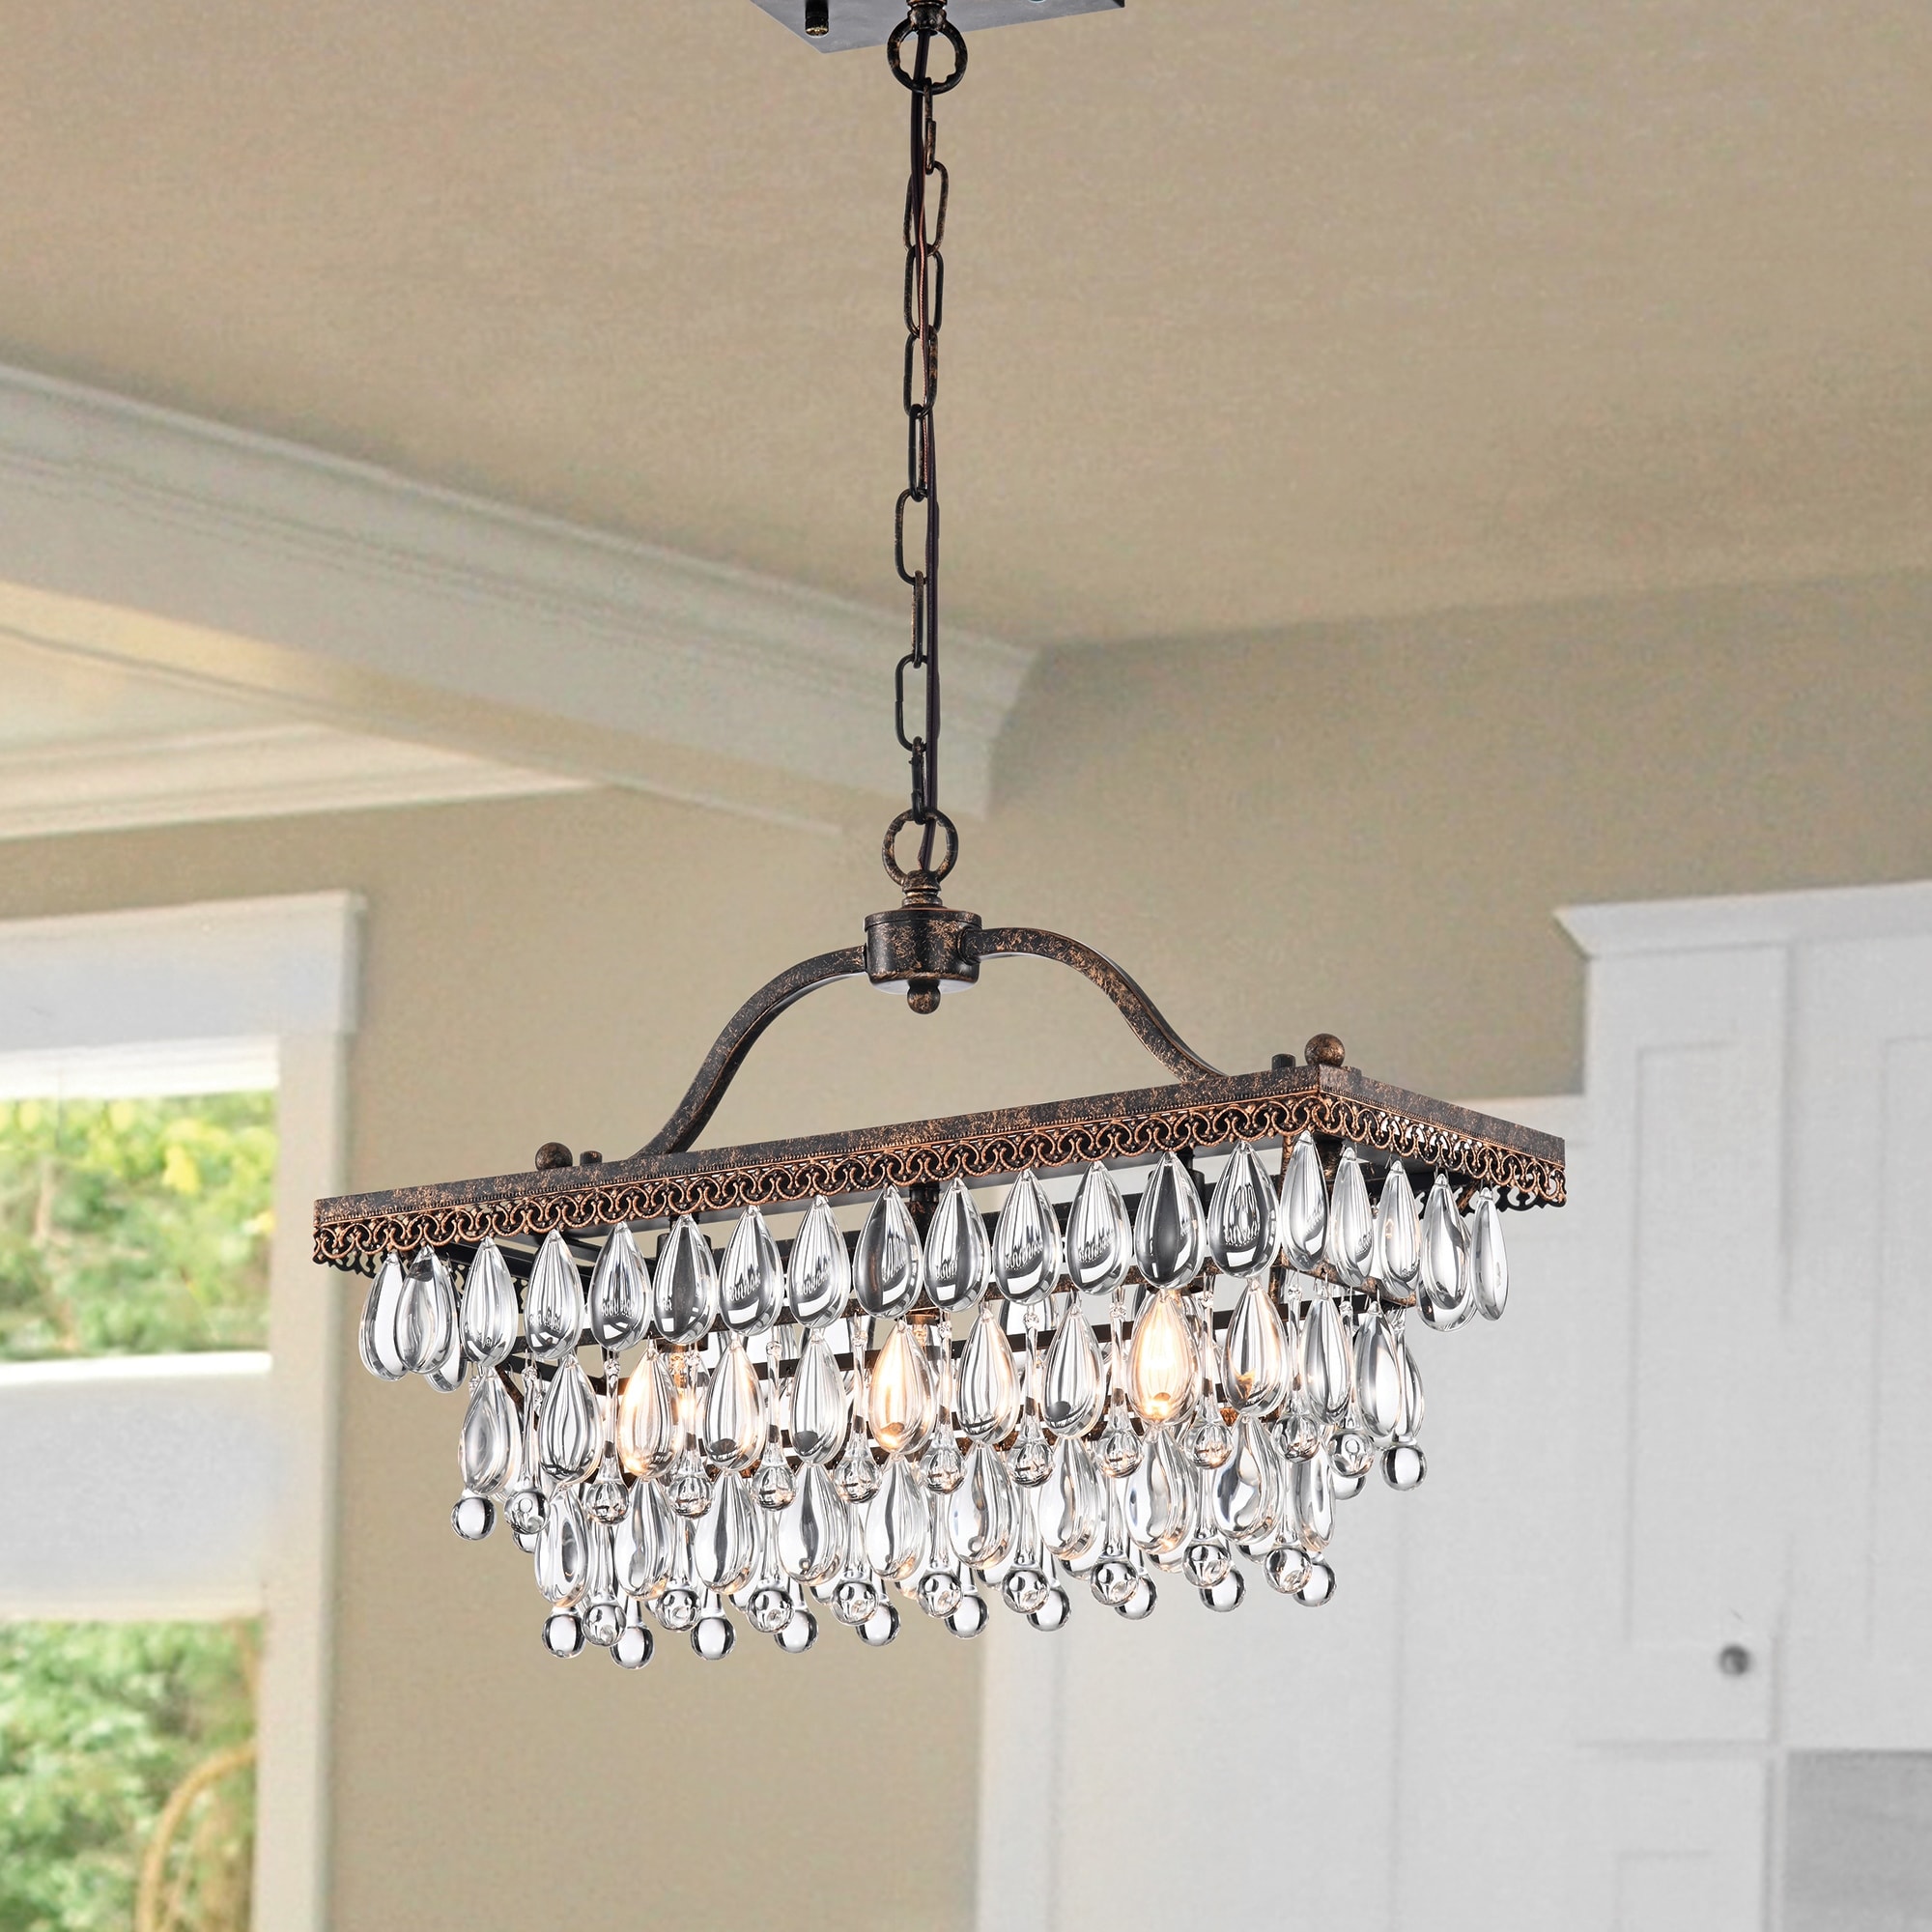 https://ak1.ostkcdn.com/images/products/is/images/direct/11d19ef87219d80ffbe3640622b368b03608f8a9/Antique-Bronze-3-Light-Rectangle-Chandelier-with-Crystal-Hanging.jpg